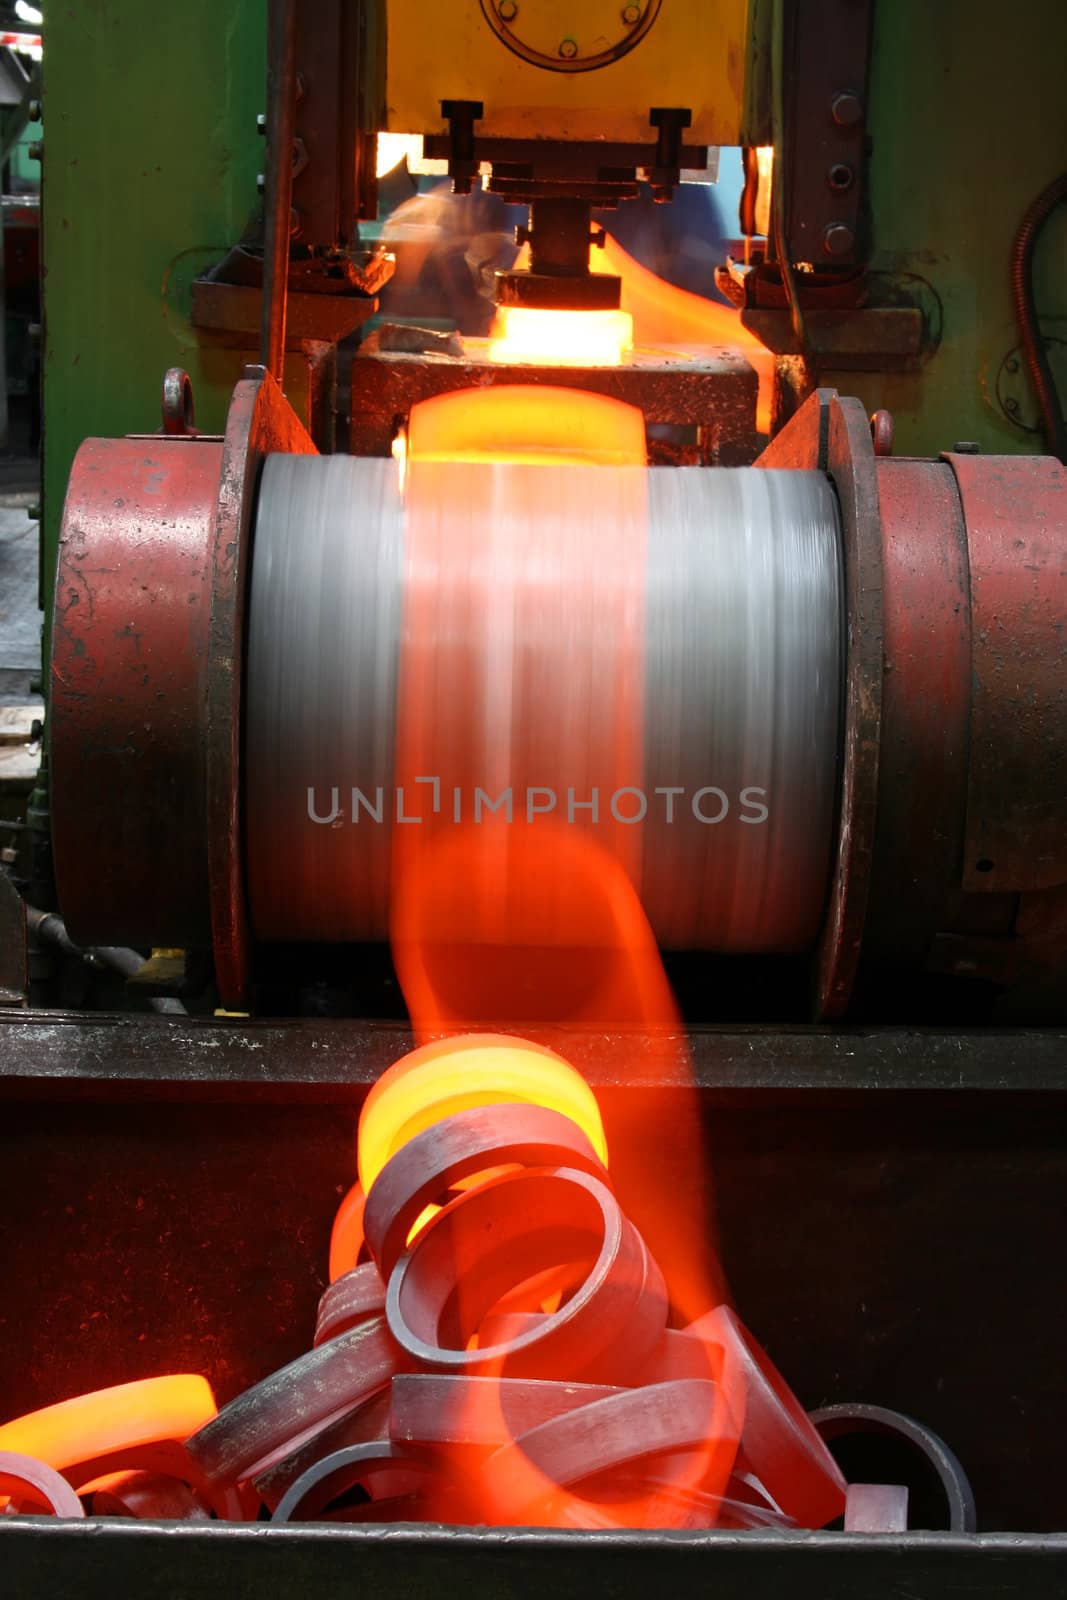 Preparations for bearing with red-hot metal falling from the moving conveyor